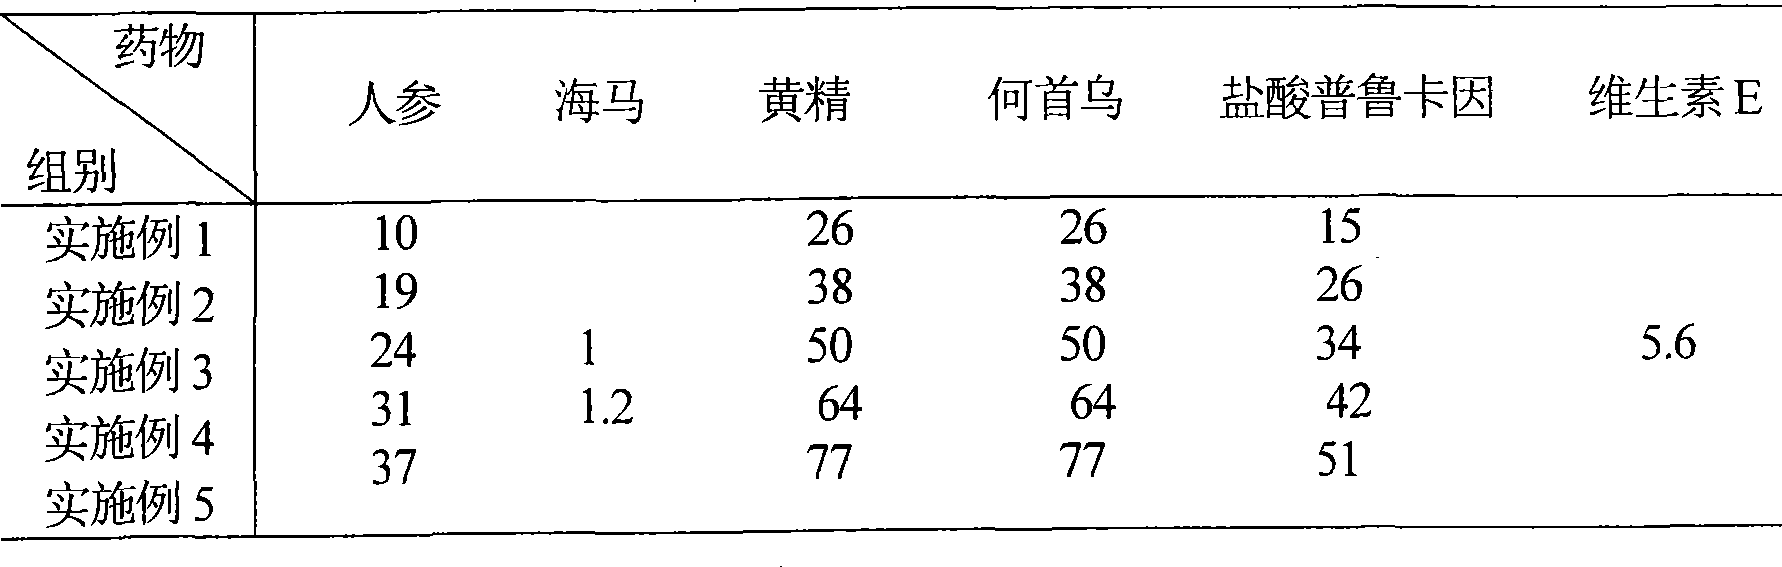 Anti-aging medicament for treating coronary heart disease and hyperlipemia, and preparation method thereof